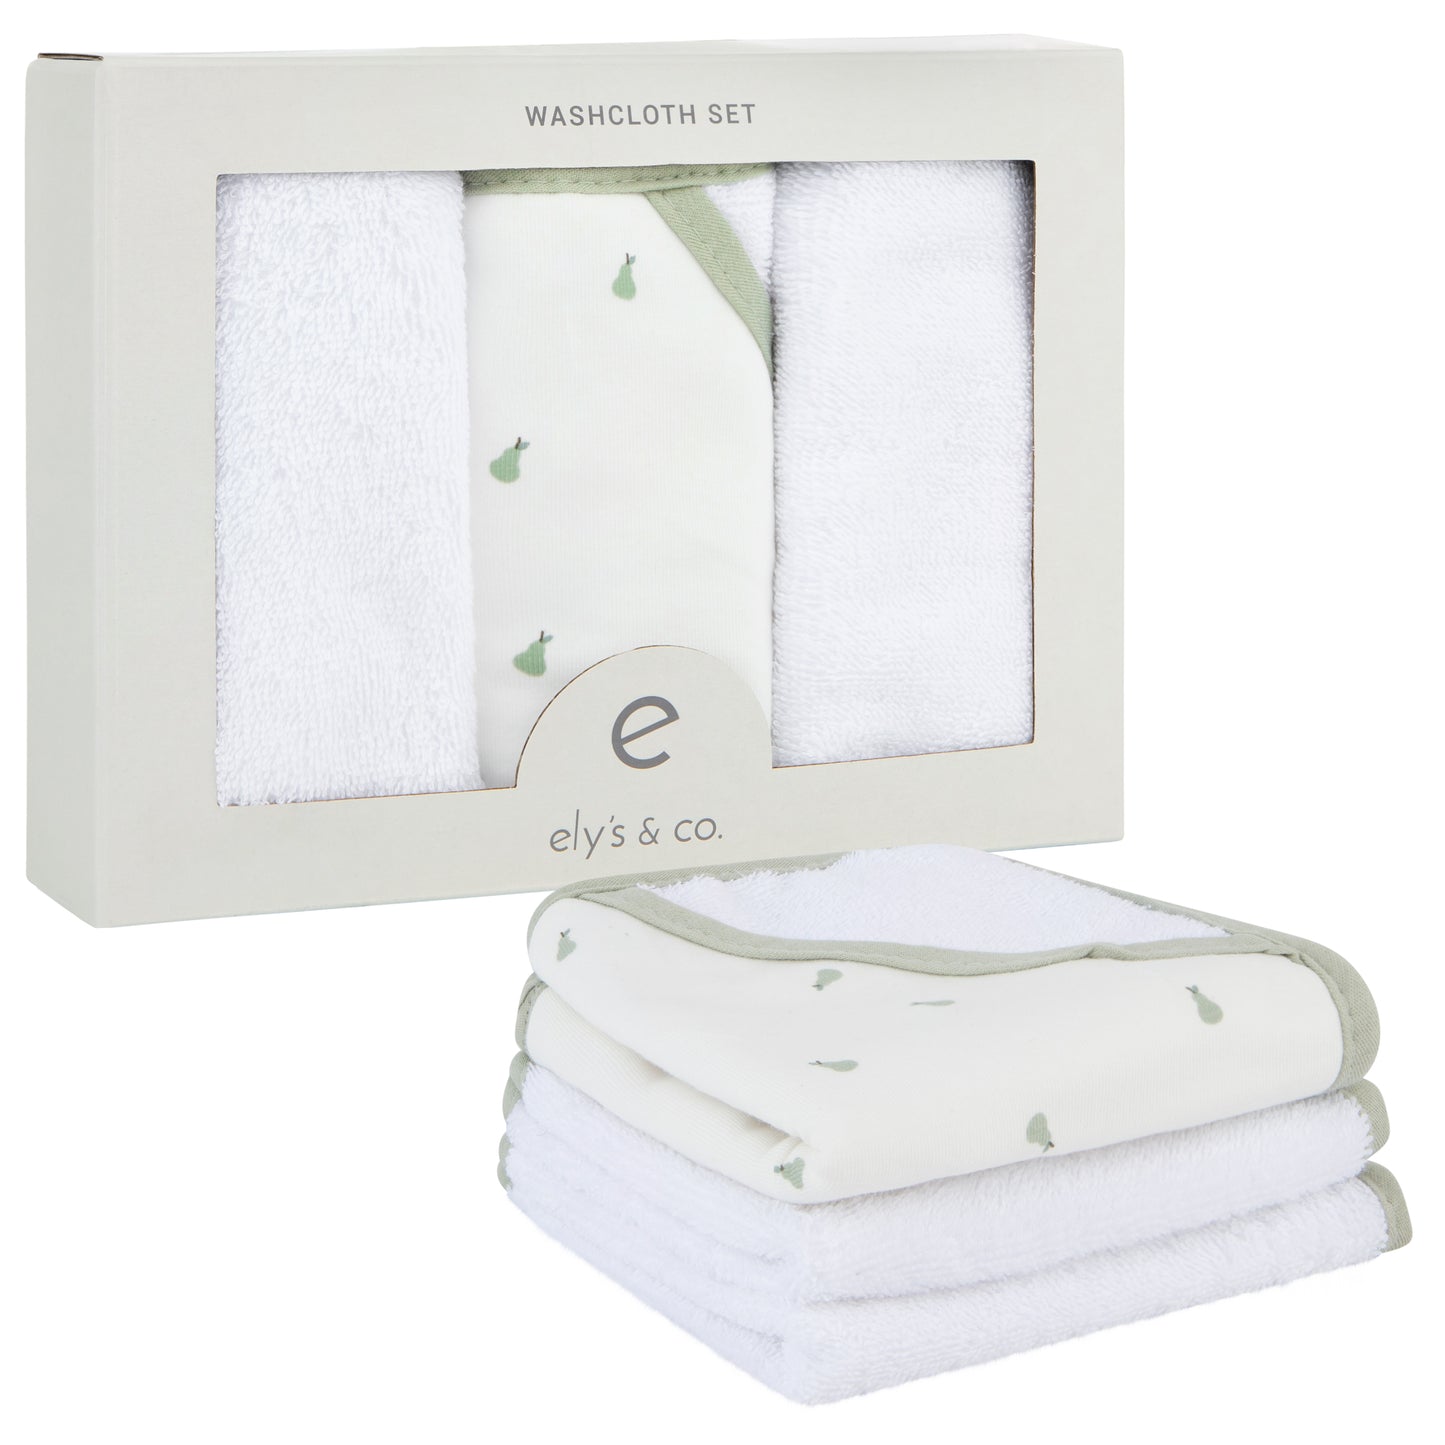 Ely's & Co. Wash Cloth (3 Pack)